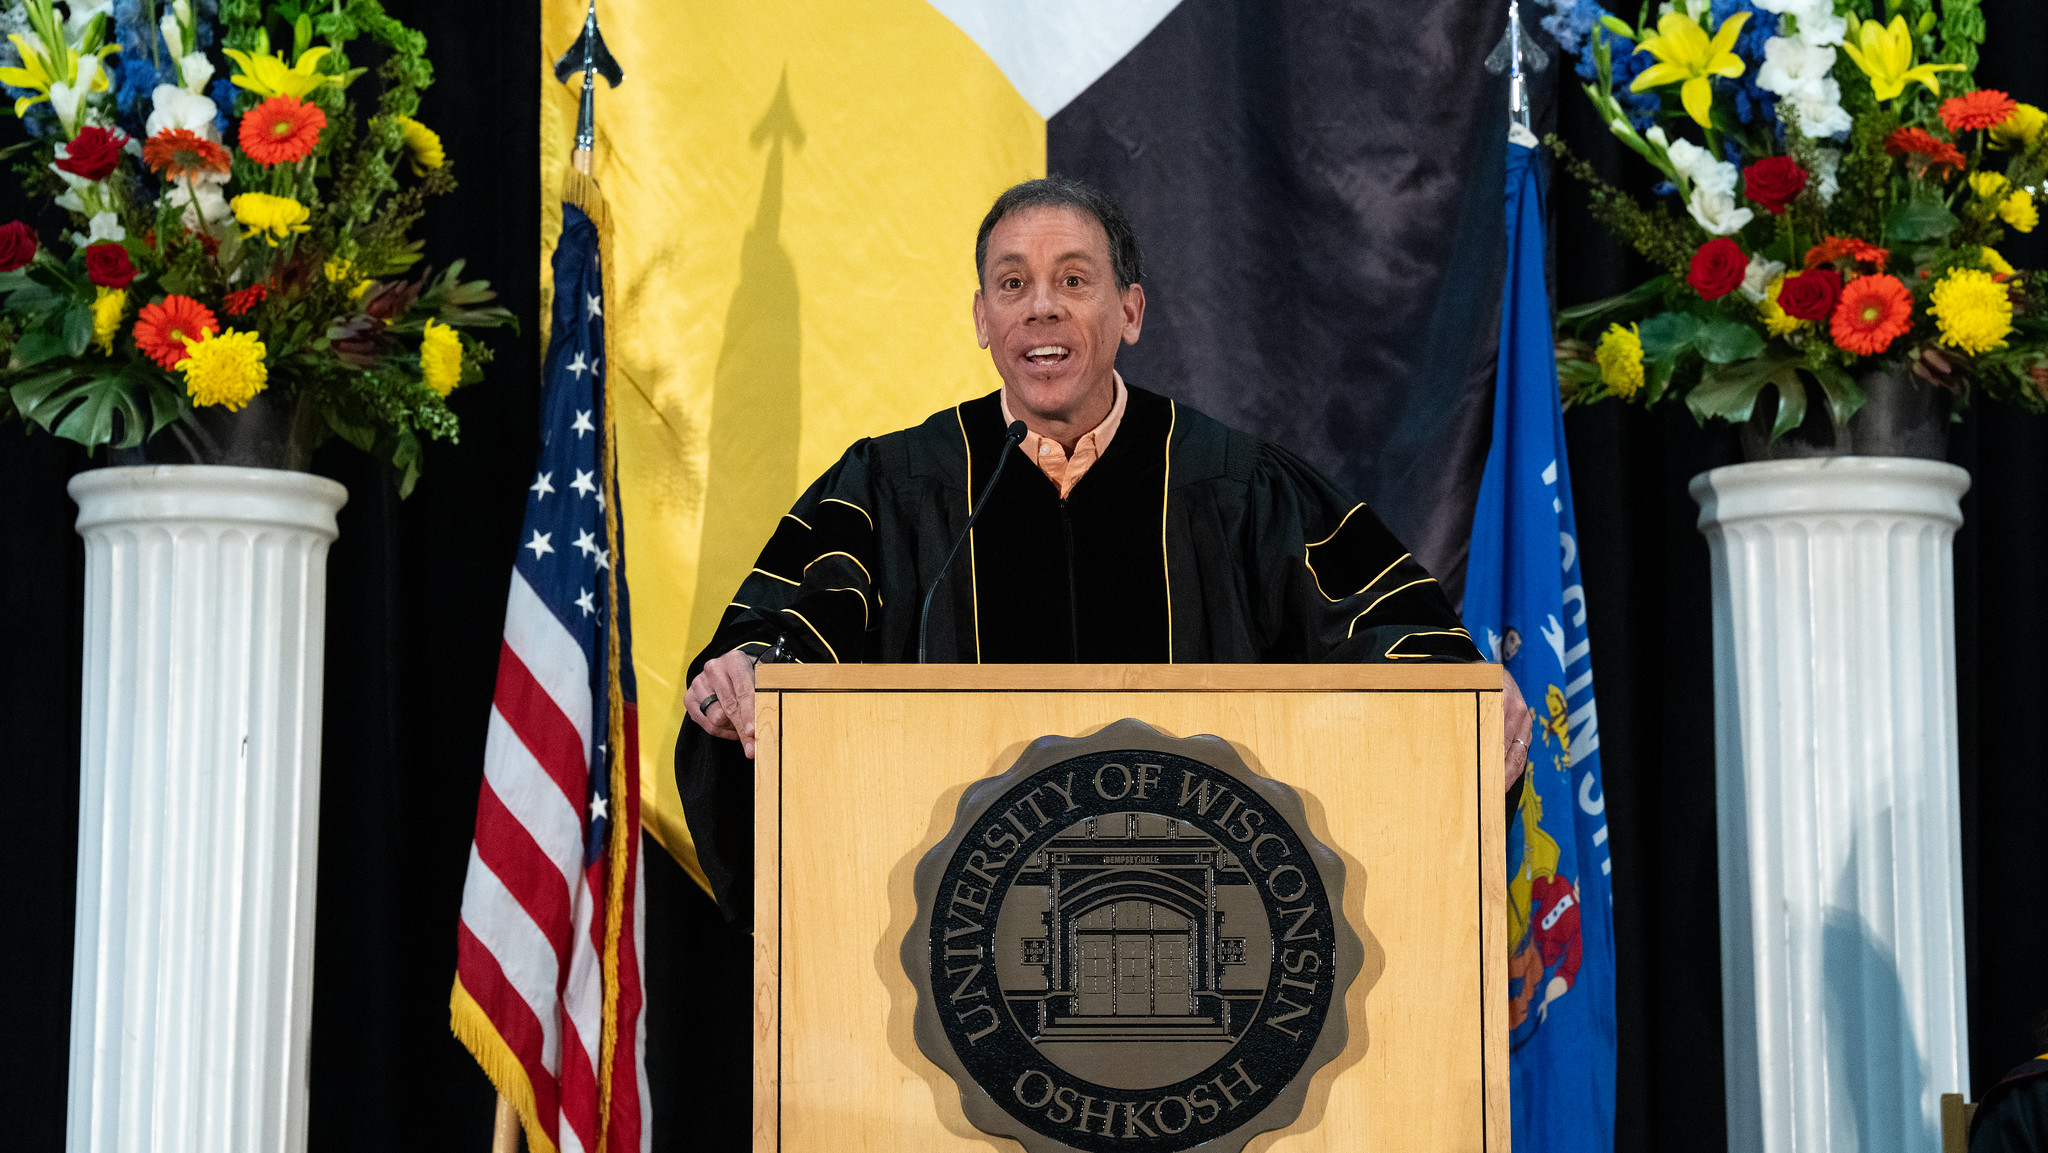 Axios co-founder shares life lessons following UW-Oshkosh commencement speech